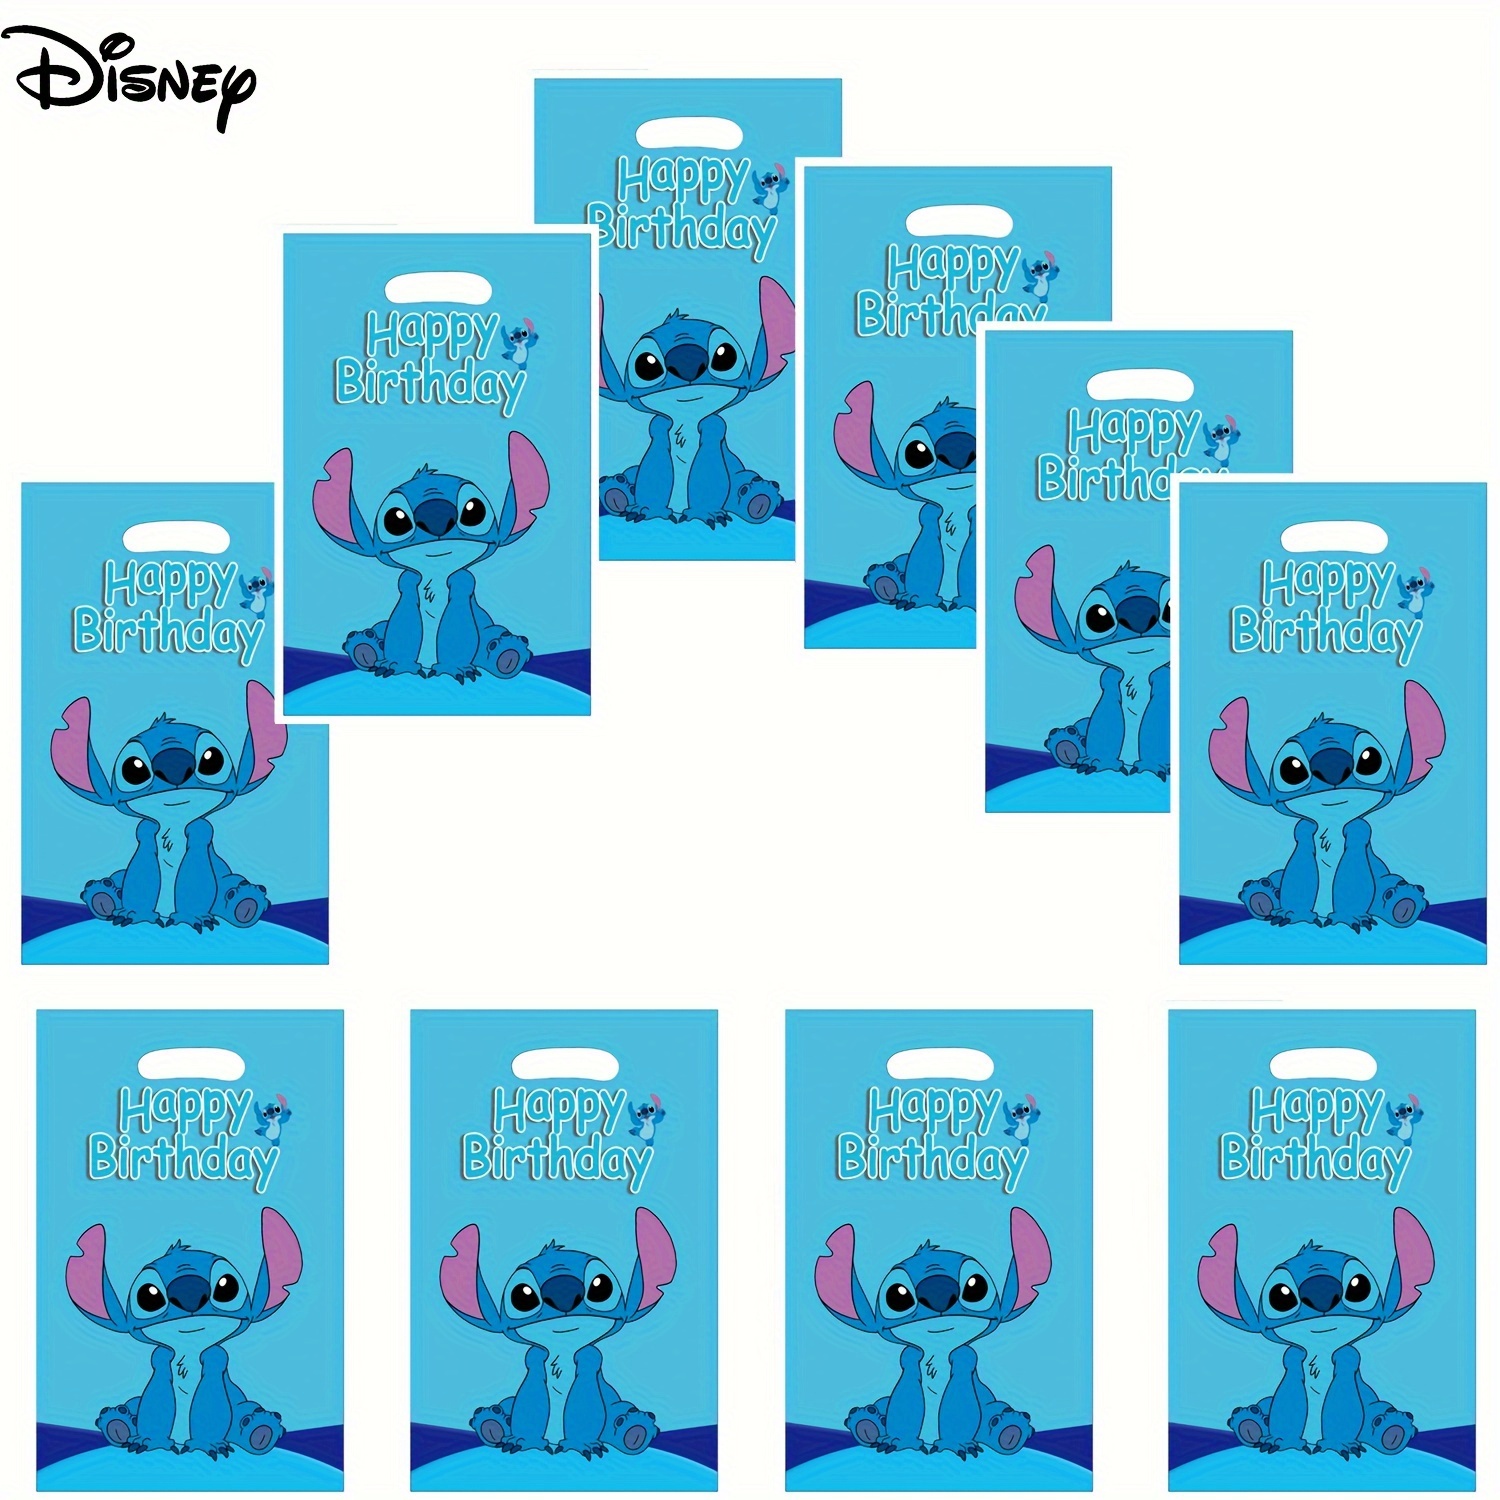 

Disney Stitch "happy Birthday" Gift Bags - 30pc Themed Party Favor Bags, Pe Material, Universal Holiday, Birthday Party Supplies, No Electricity Required